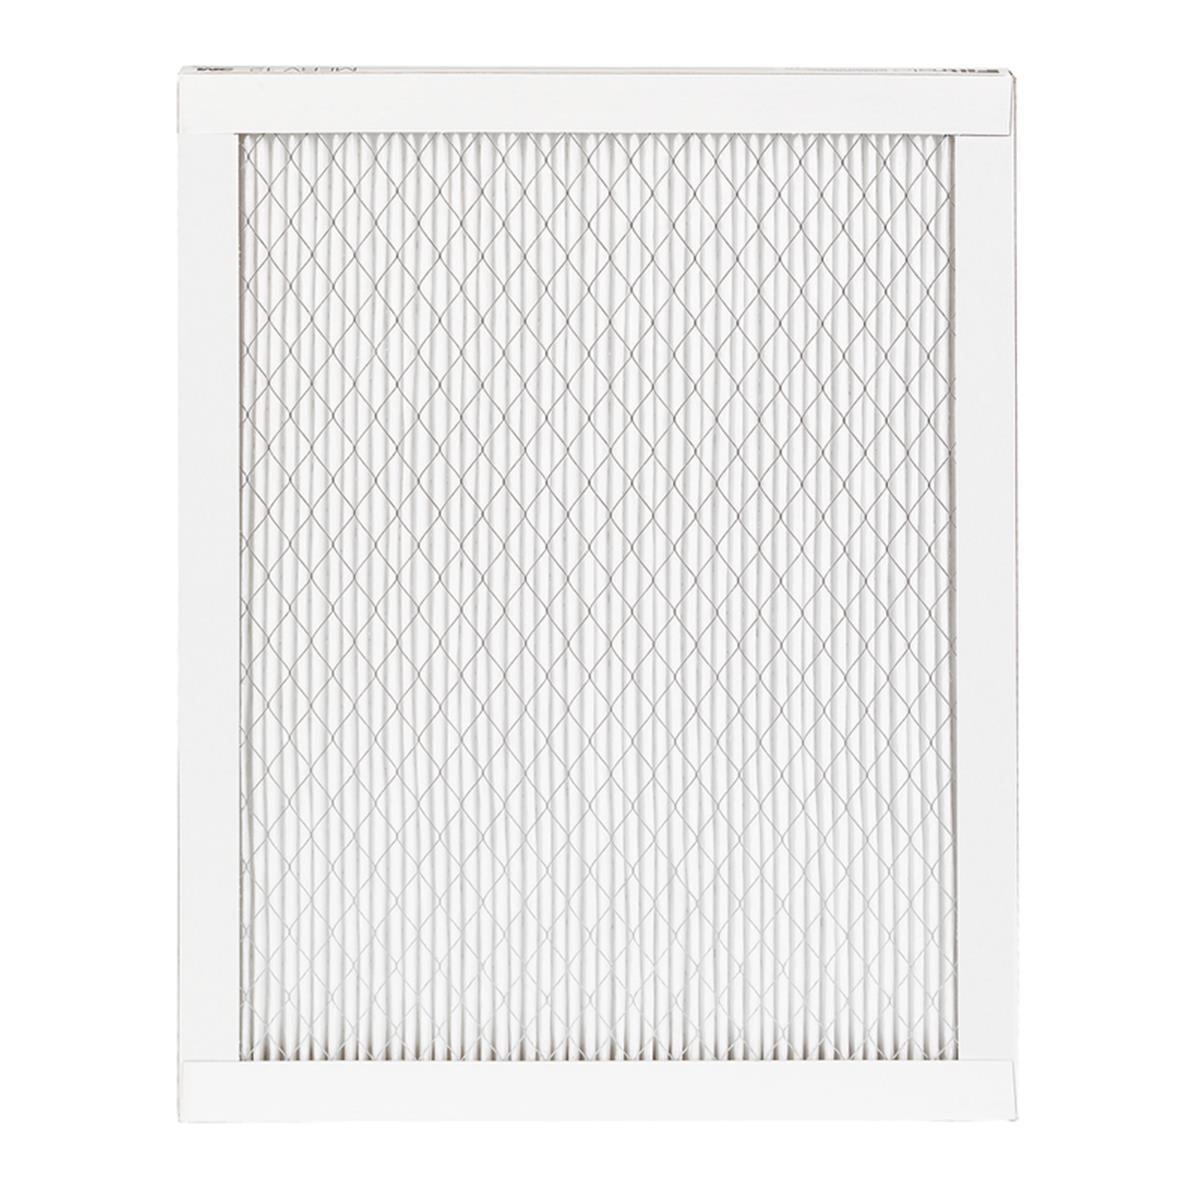 Picture of 3M 4269502 18 x 18 x 1 in. 1500 MPR Air Filter - pack of 4